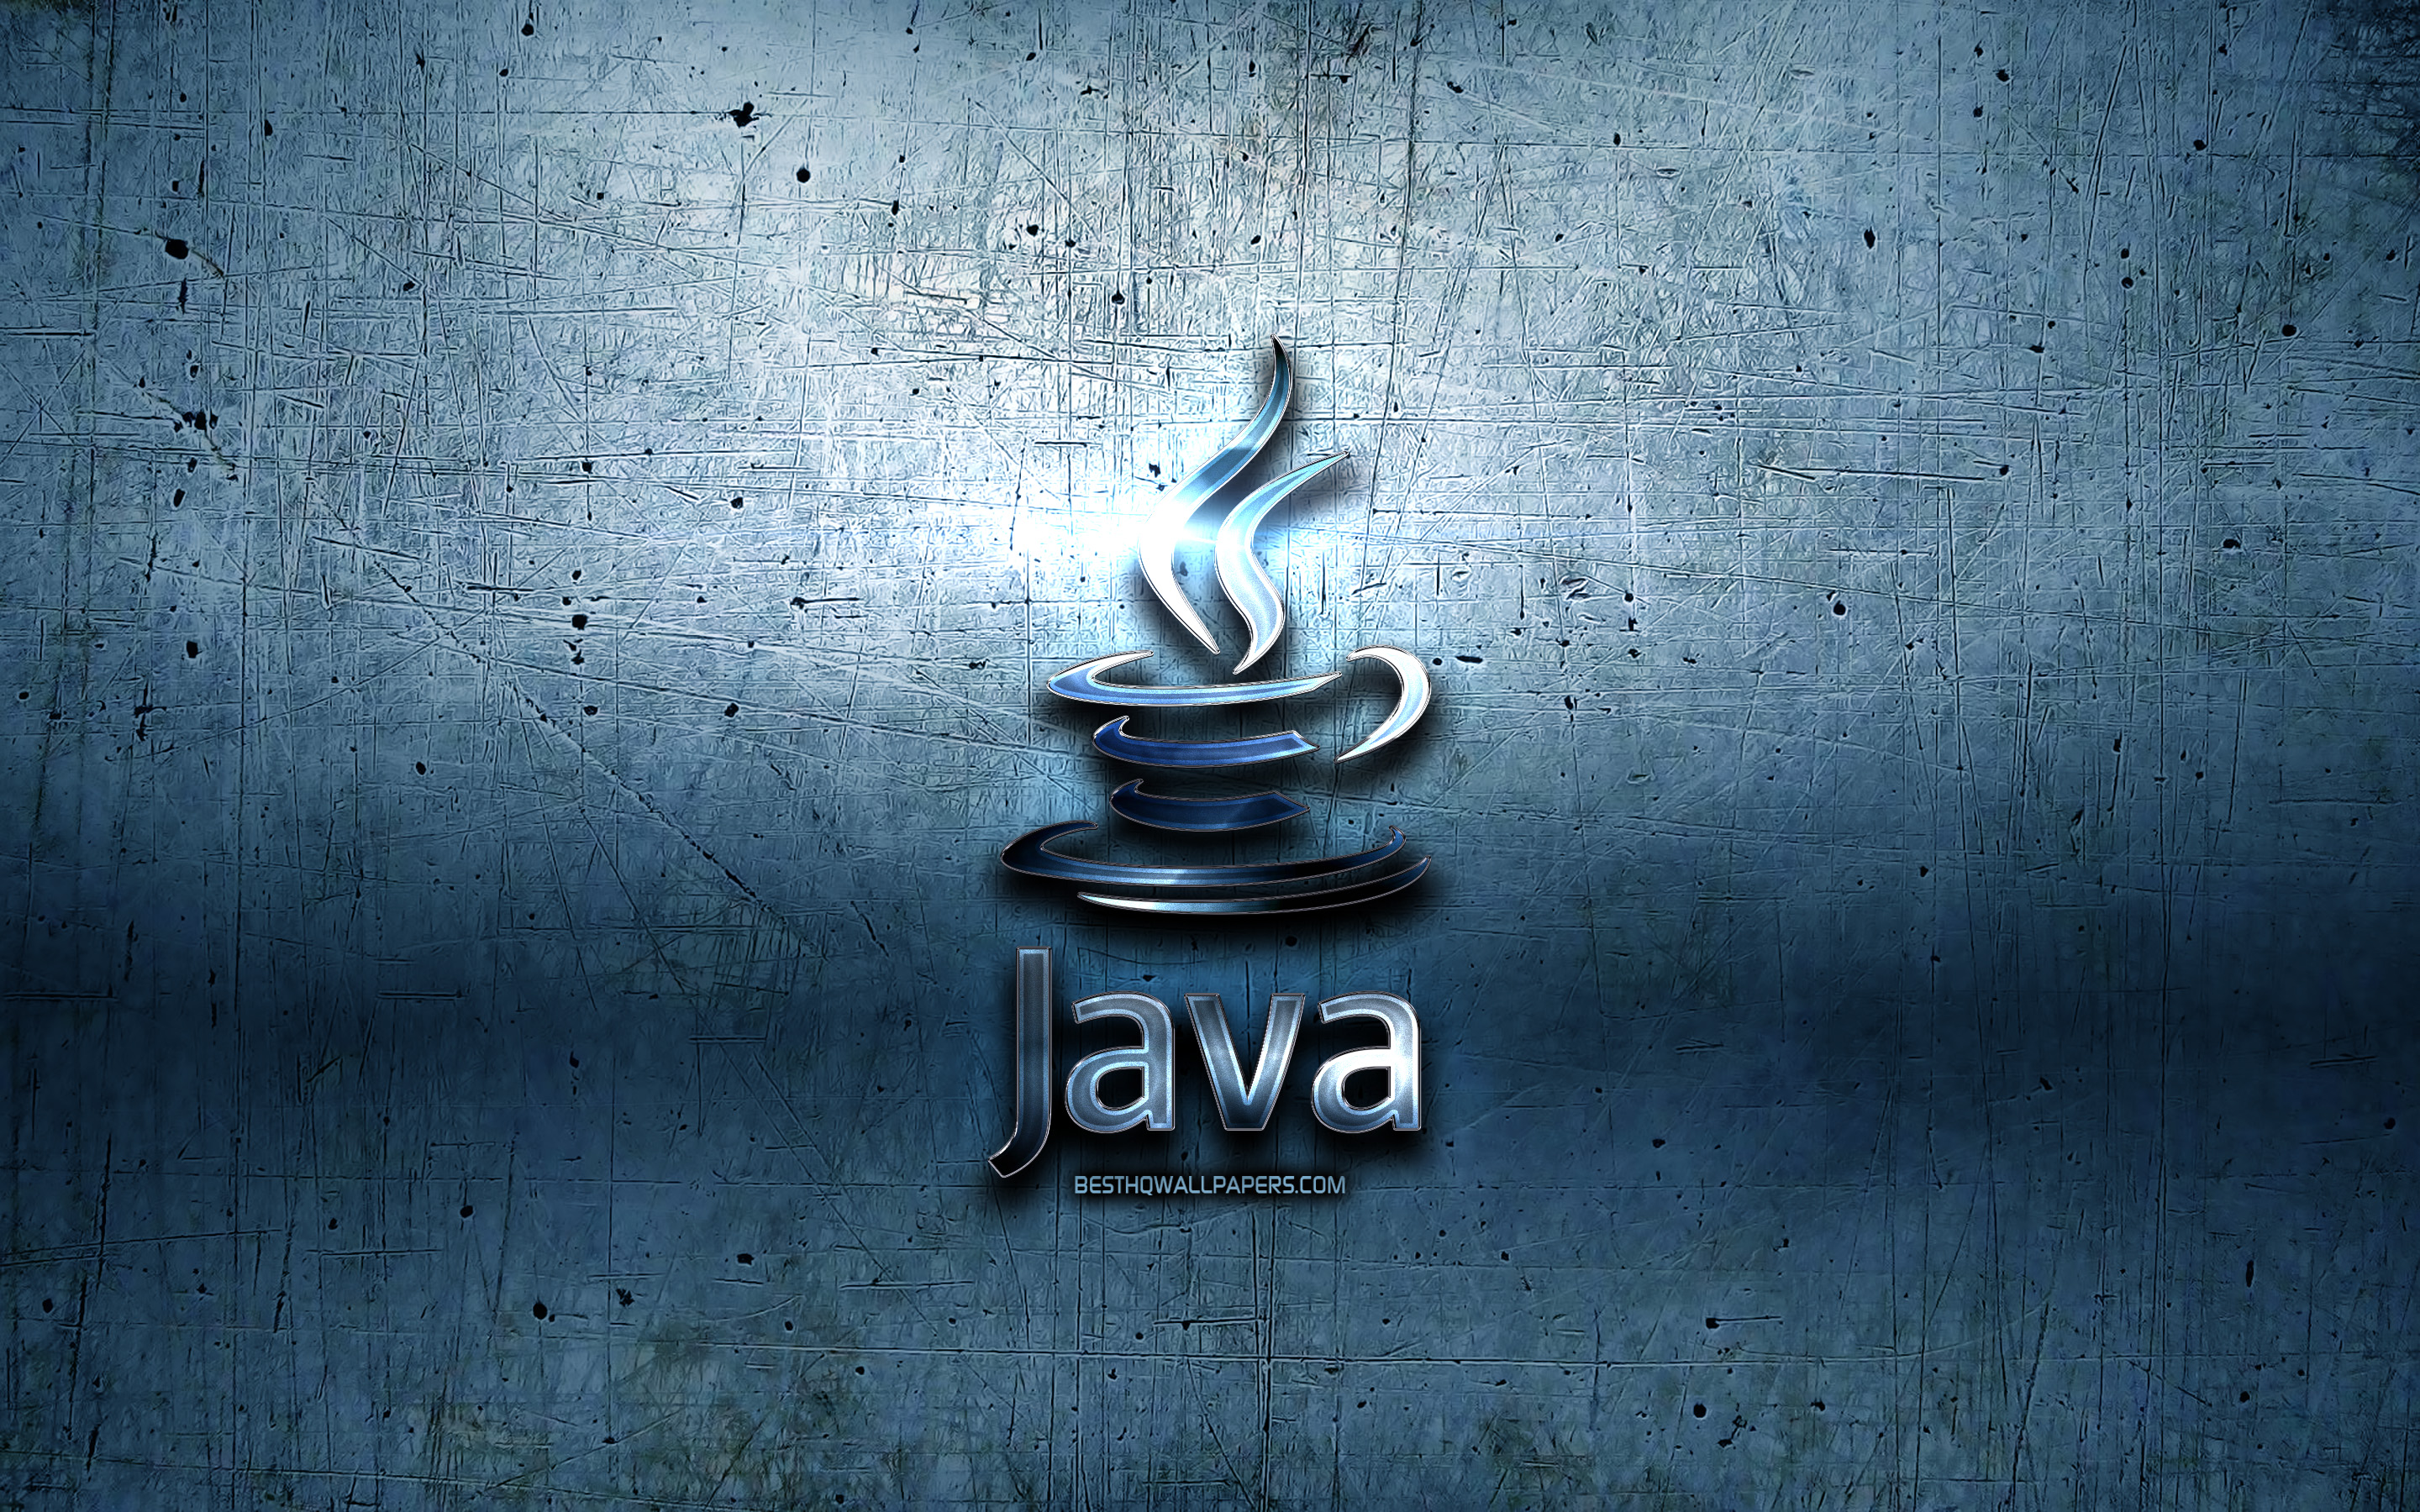 Download wallpaper Java metal logo, grunge, programming language signs, blue metal background, Java, creative, programming language, Java logo for desktop with resolution 2880x1800. High Quality HD picture wallpaper